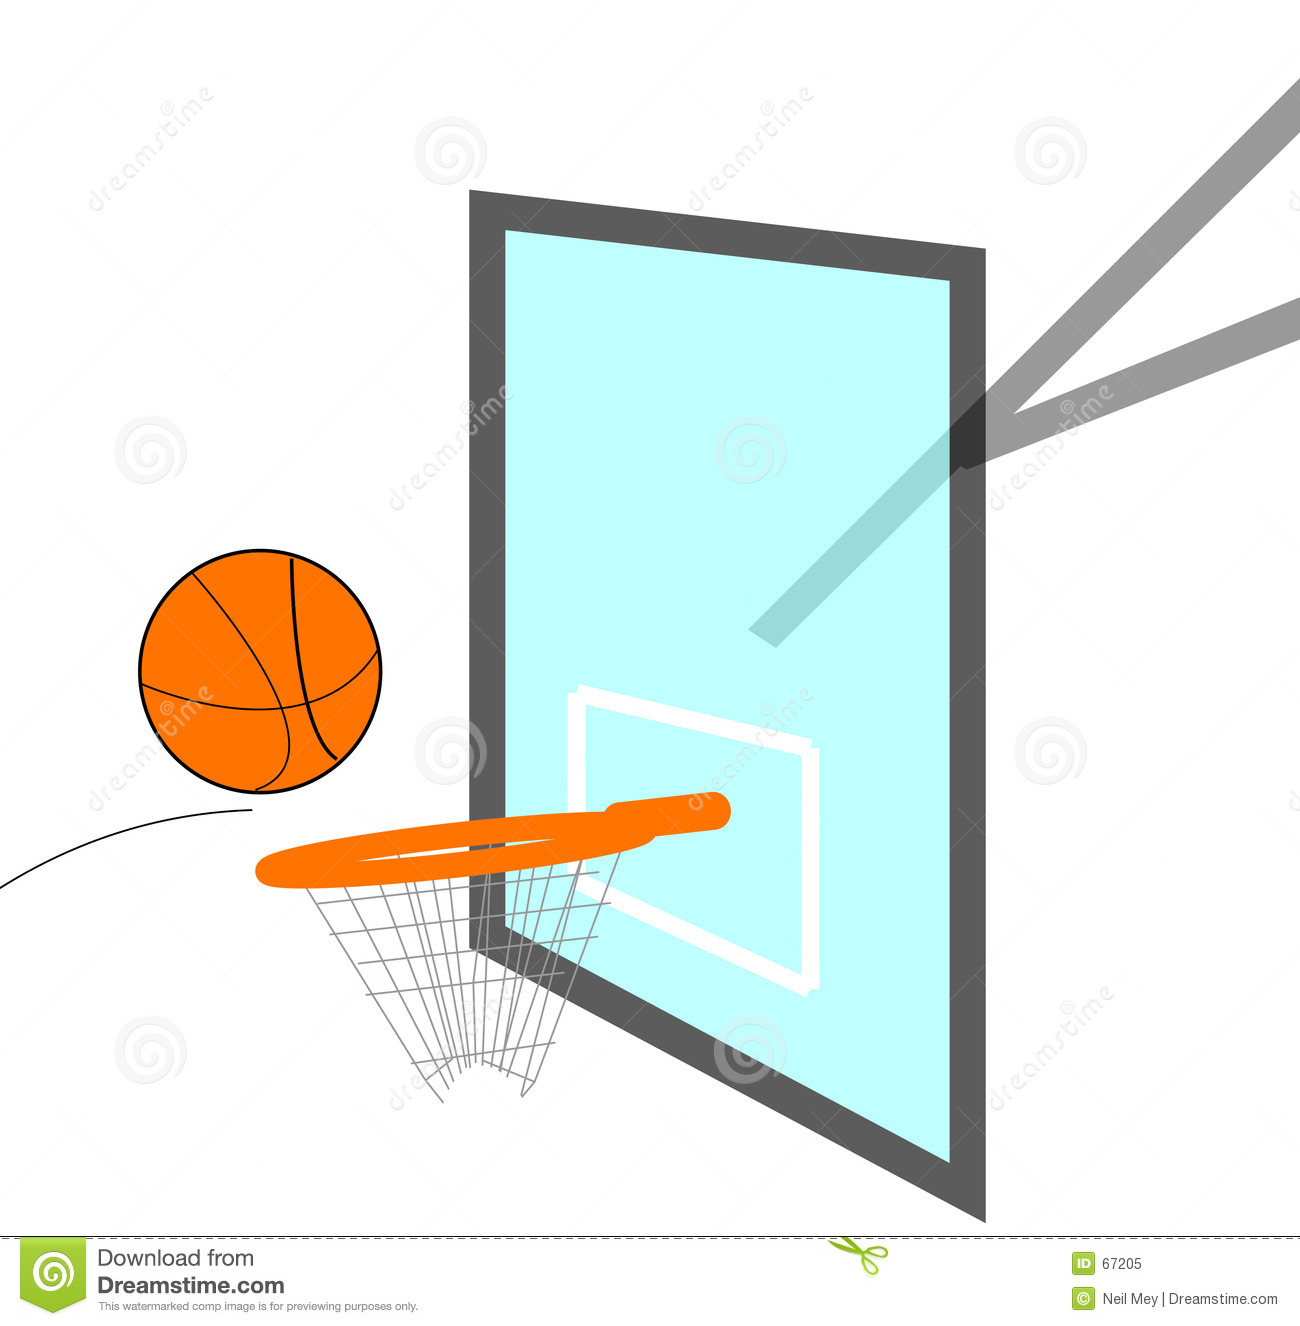 Basketball Swoosh   Clipart Panda   Free Clipart Images